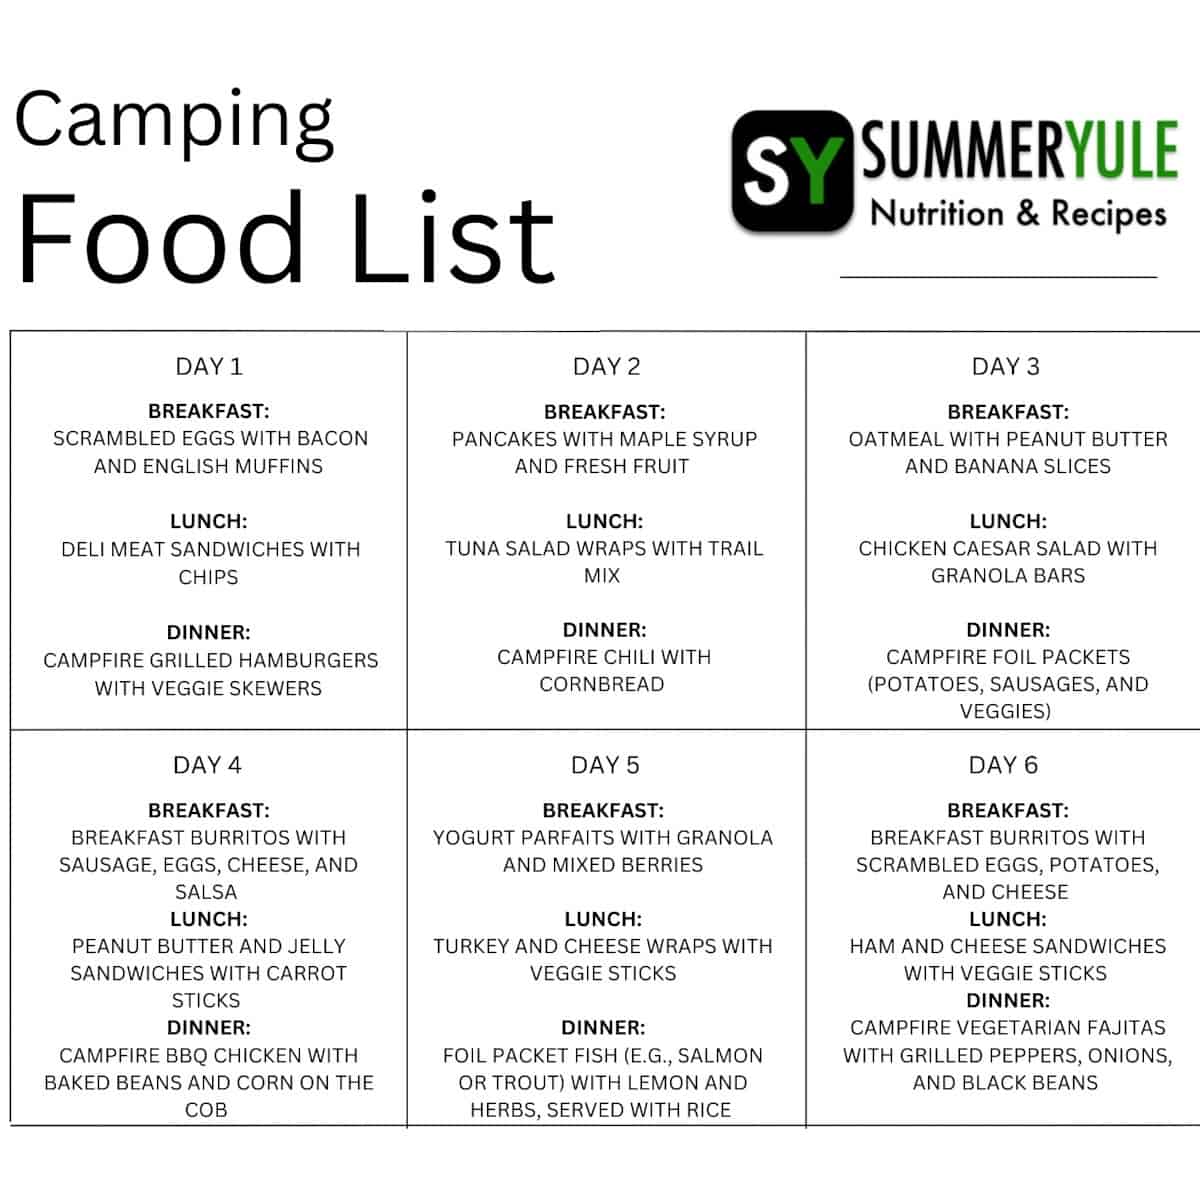 Camping Food List (Camping Grocery List for 3,4,5,6, or 7 Days)